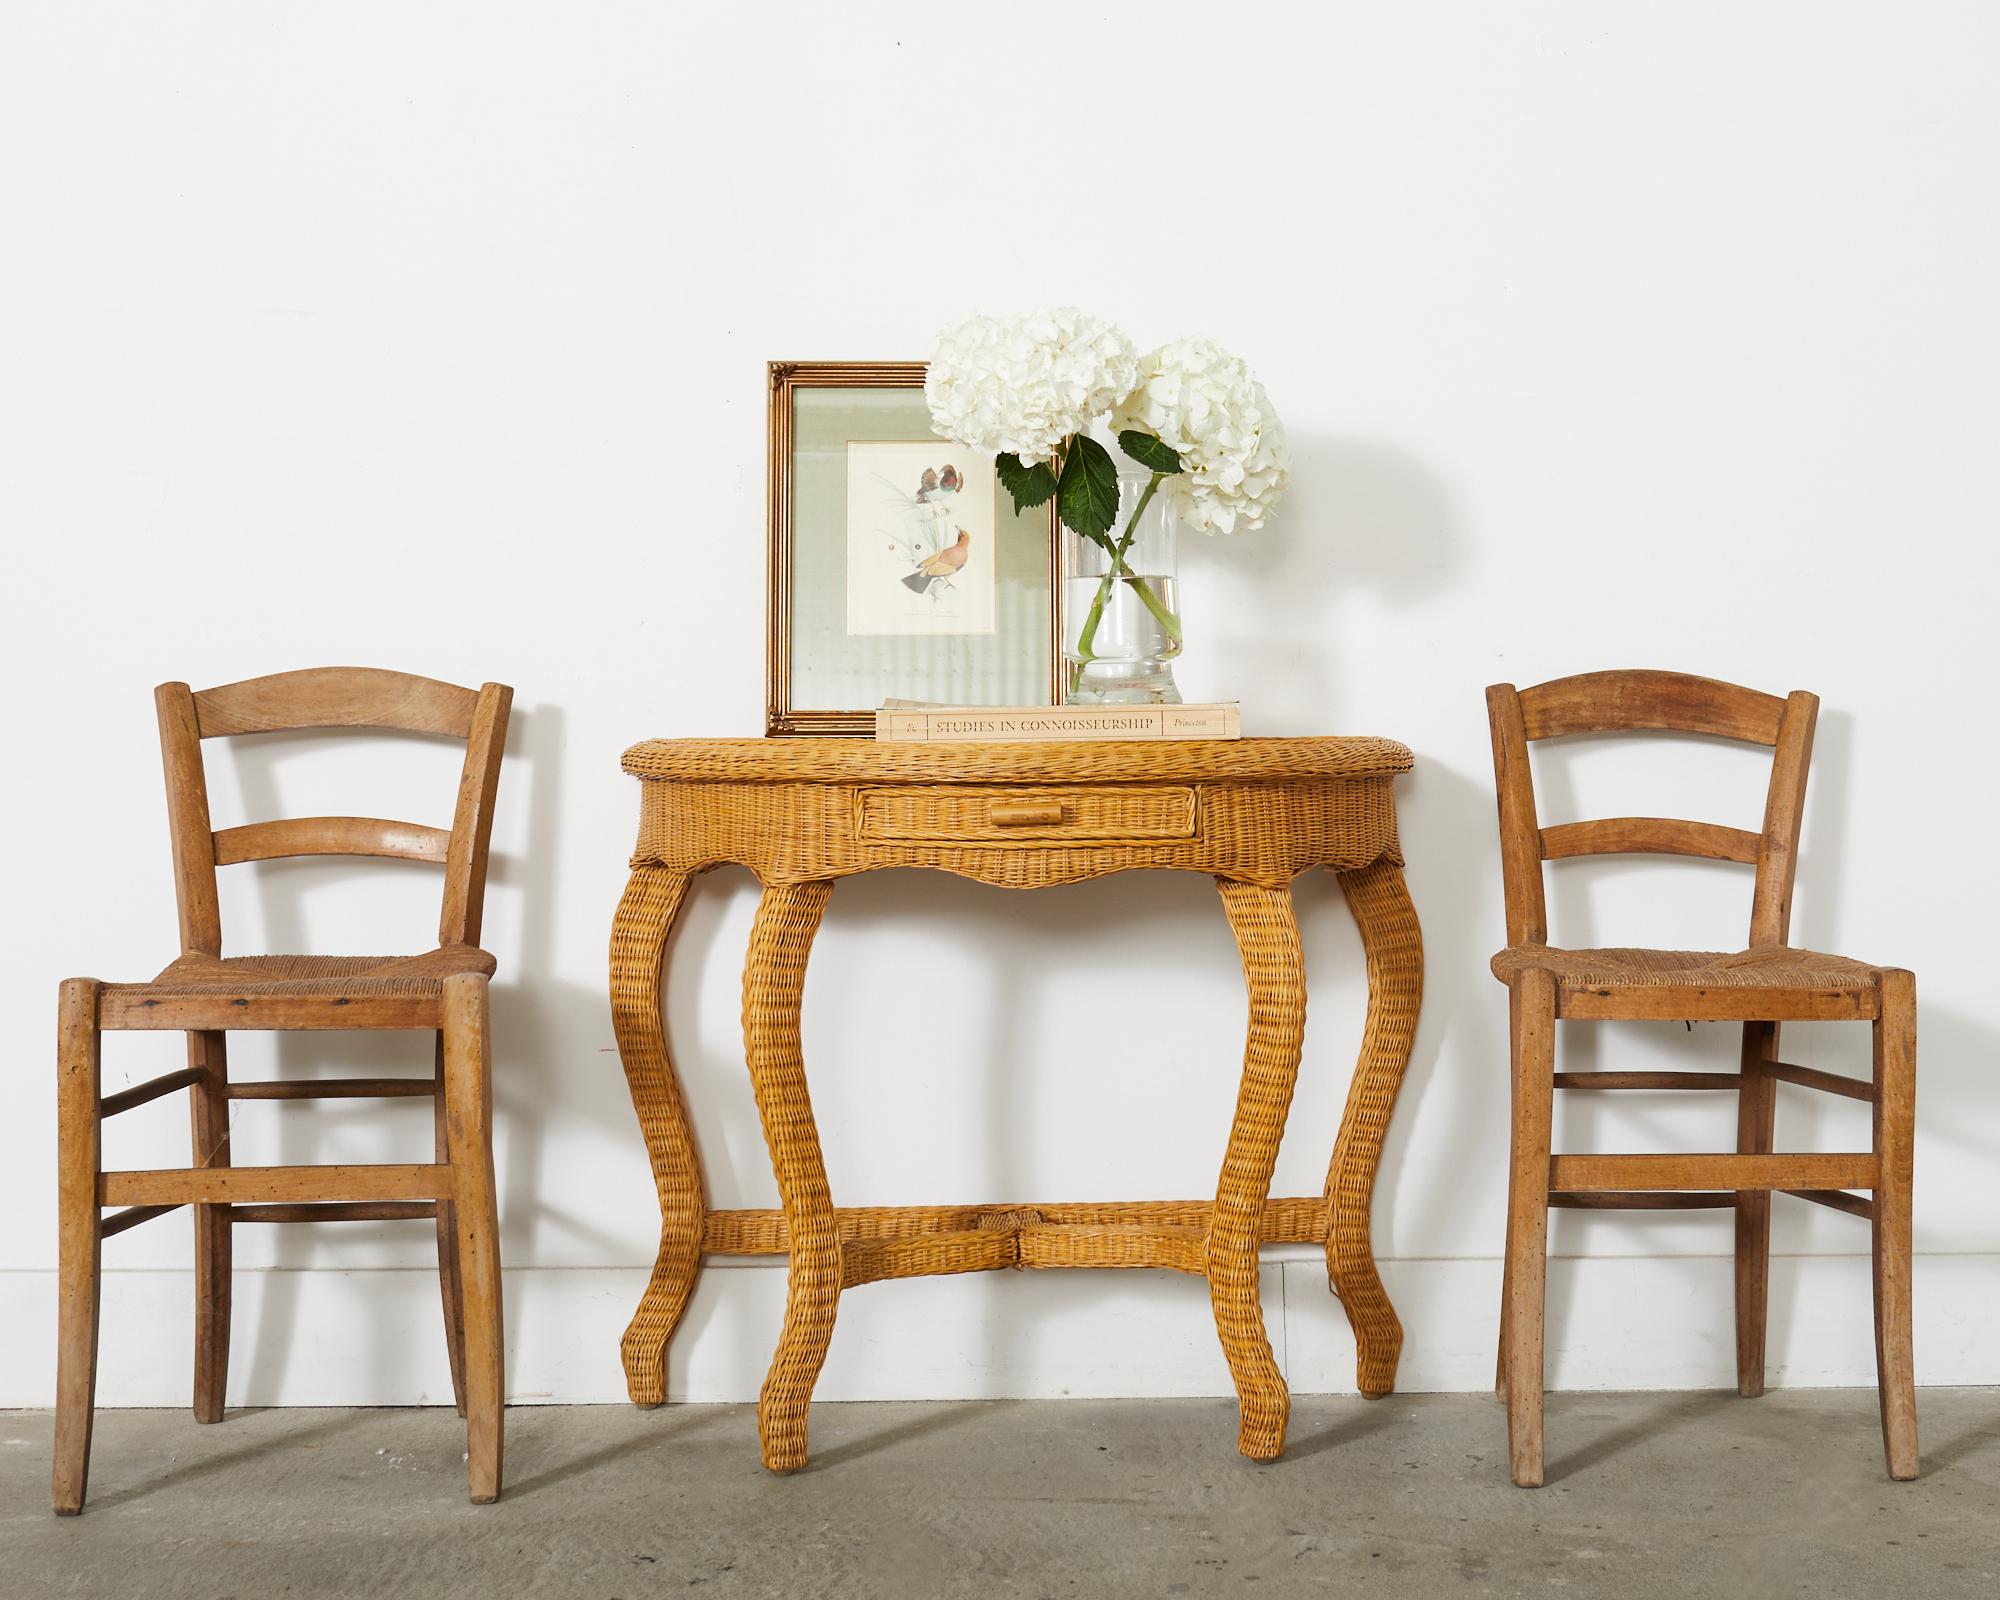 Charming mid-century organic modern demi-lune console table featuring a wood frame covered with fine woven wicker. The table has a small braided gallery edge around the top border. The console is fronted by a small storage drawer in the middle with